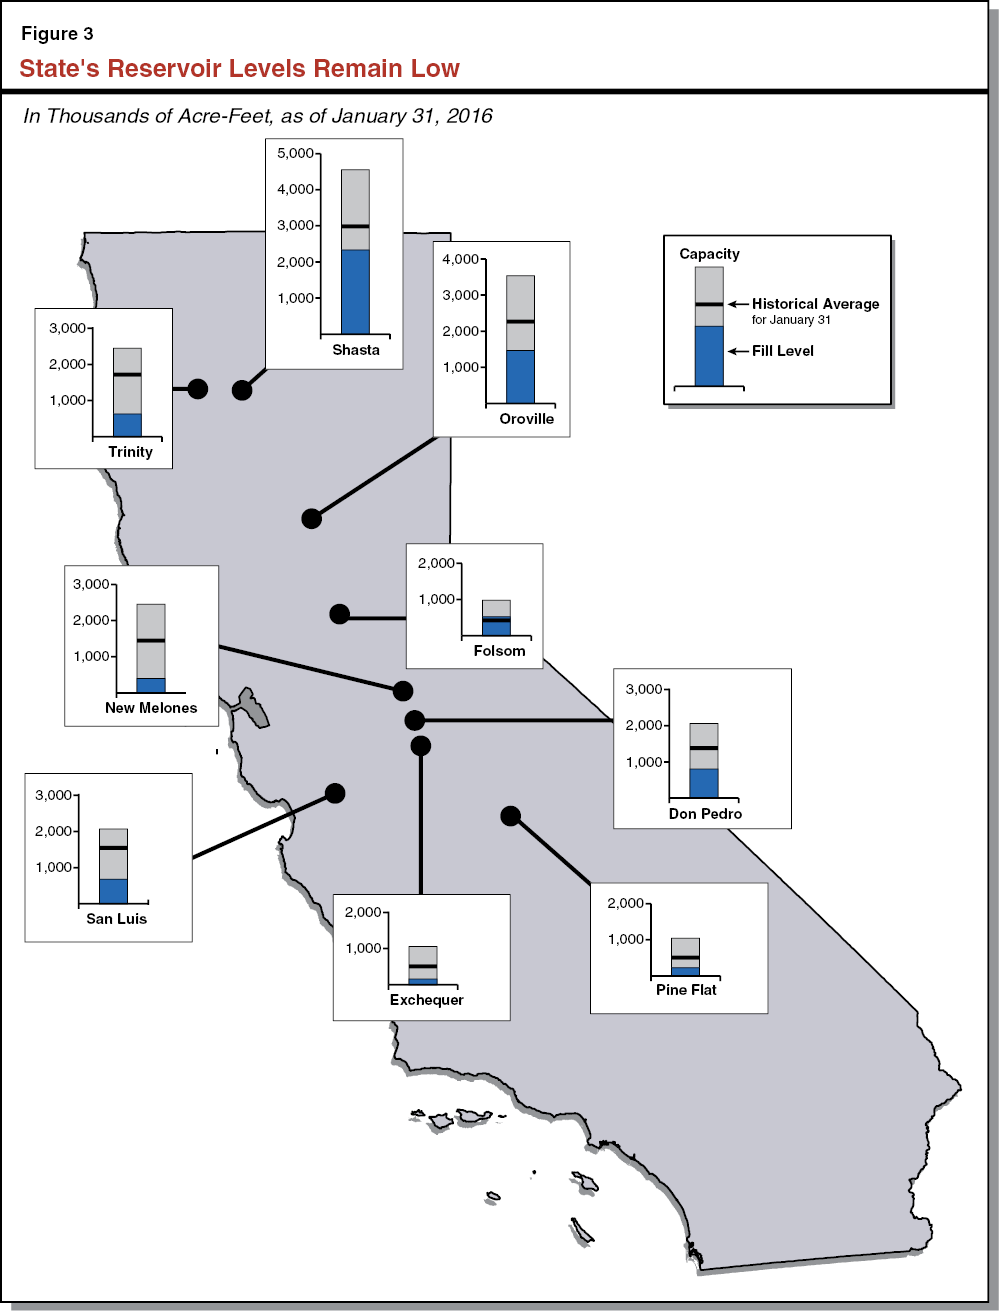 Figure 3 - State's Reservoir Levels Remain Low